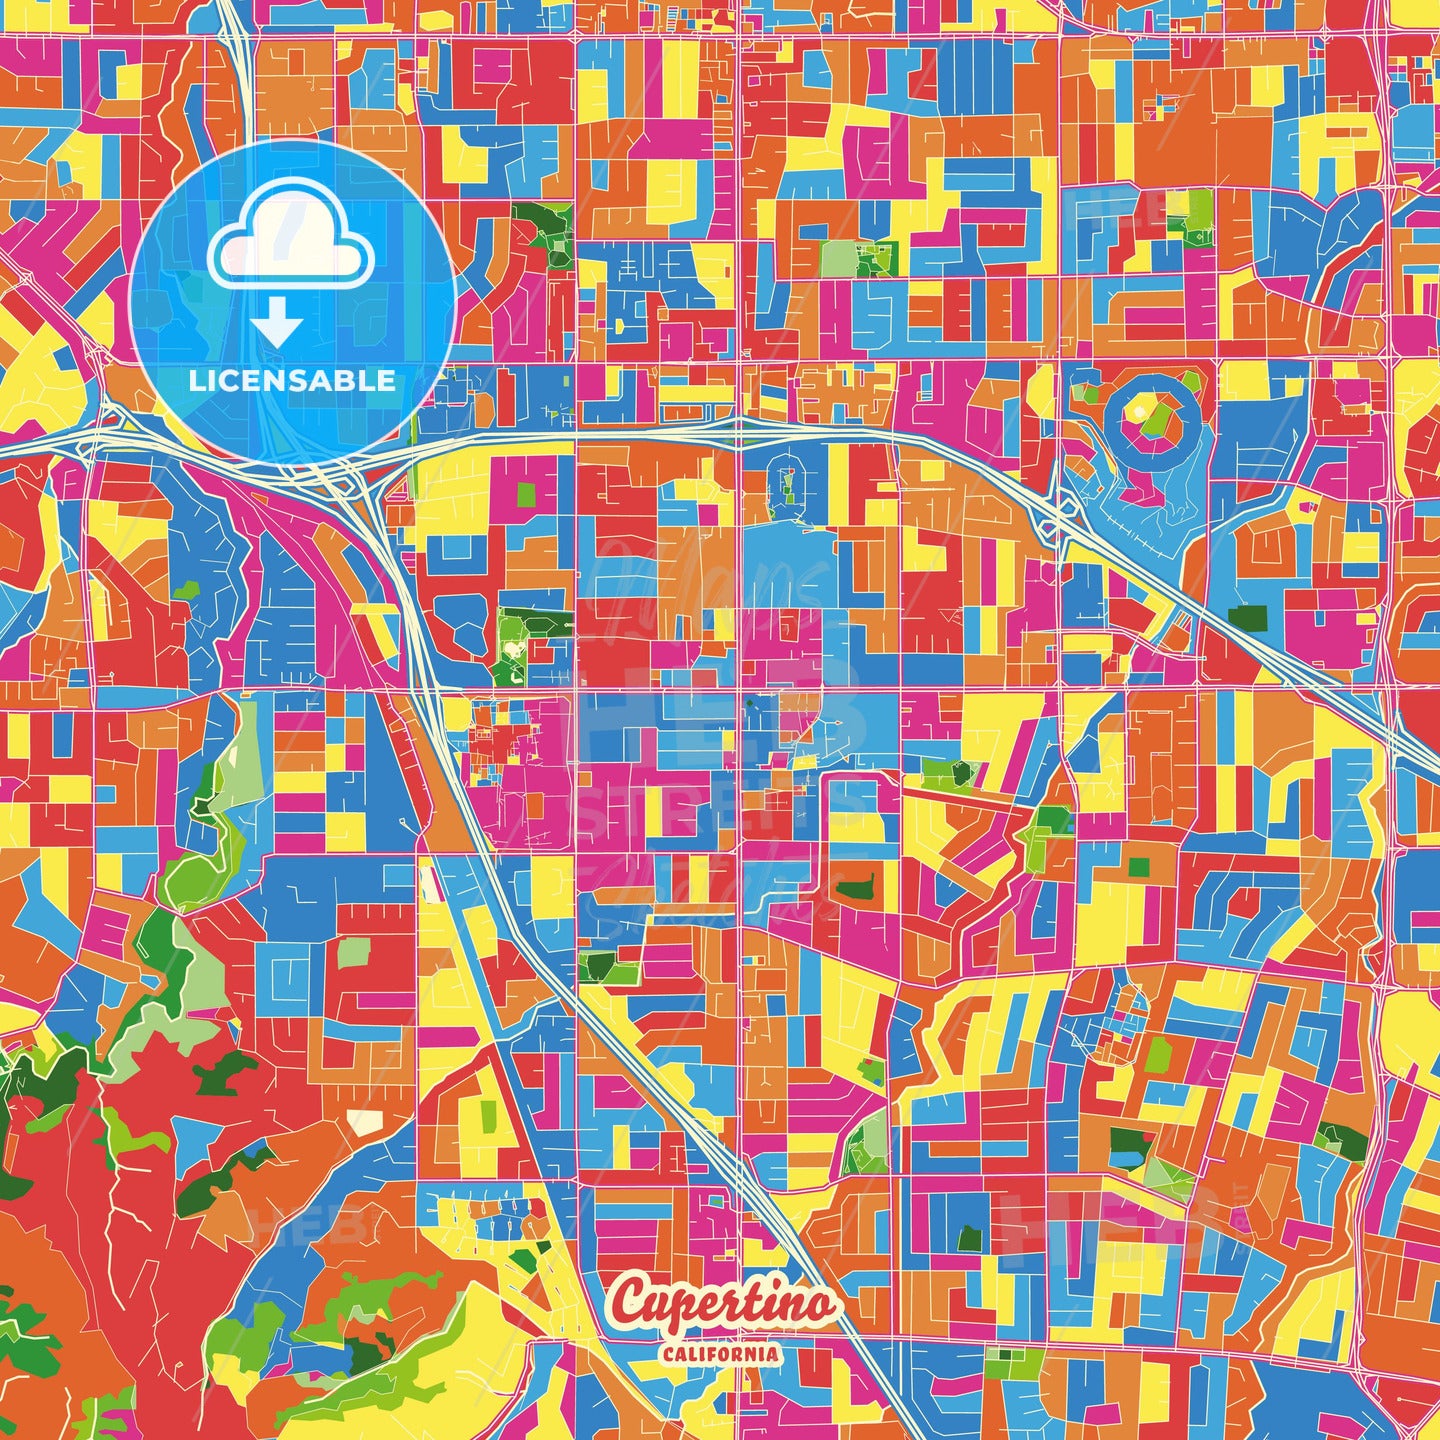 Cupertino, United States Crazy Colorful Street Map Poster Template - HEBSTREITS Sketches